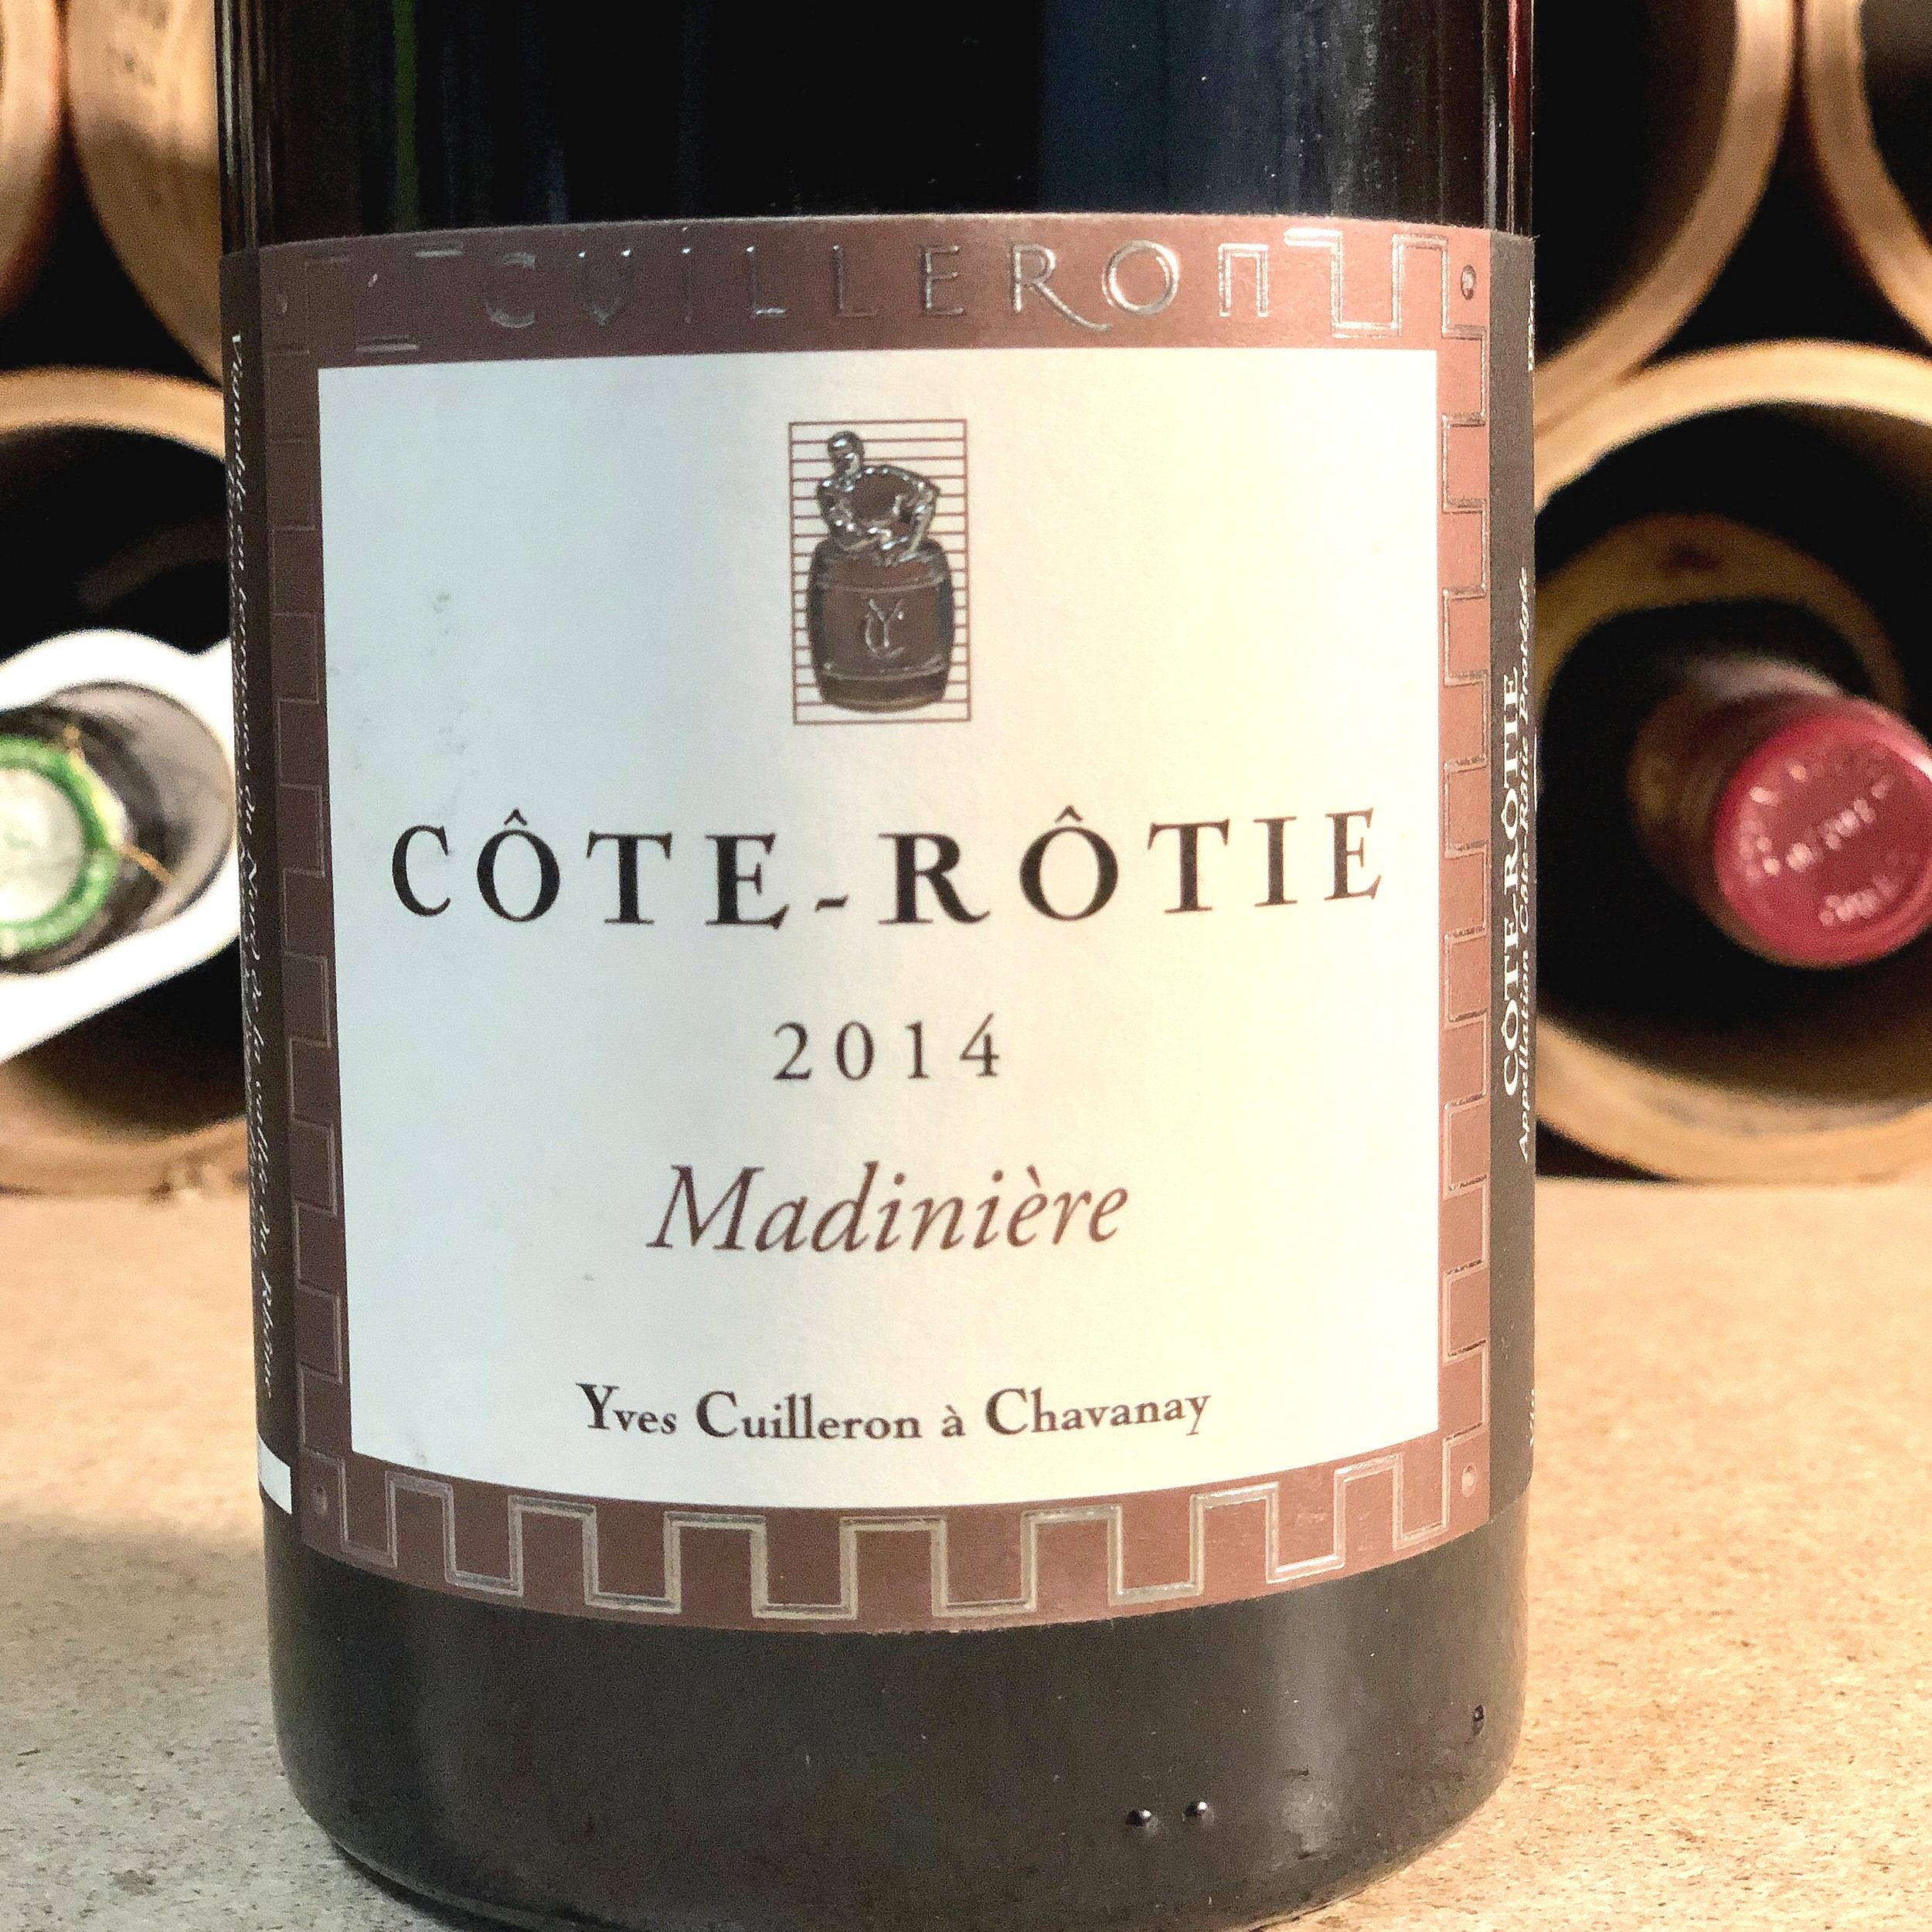 Yves Cuilleron, Cote Rotie, Madiniere 2014